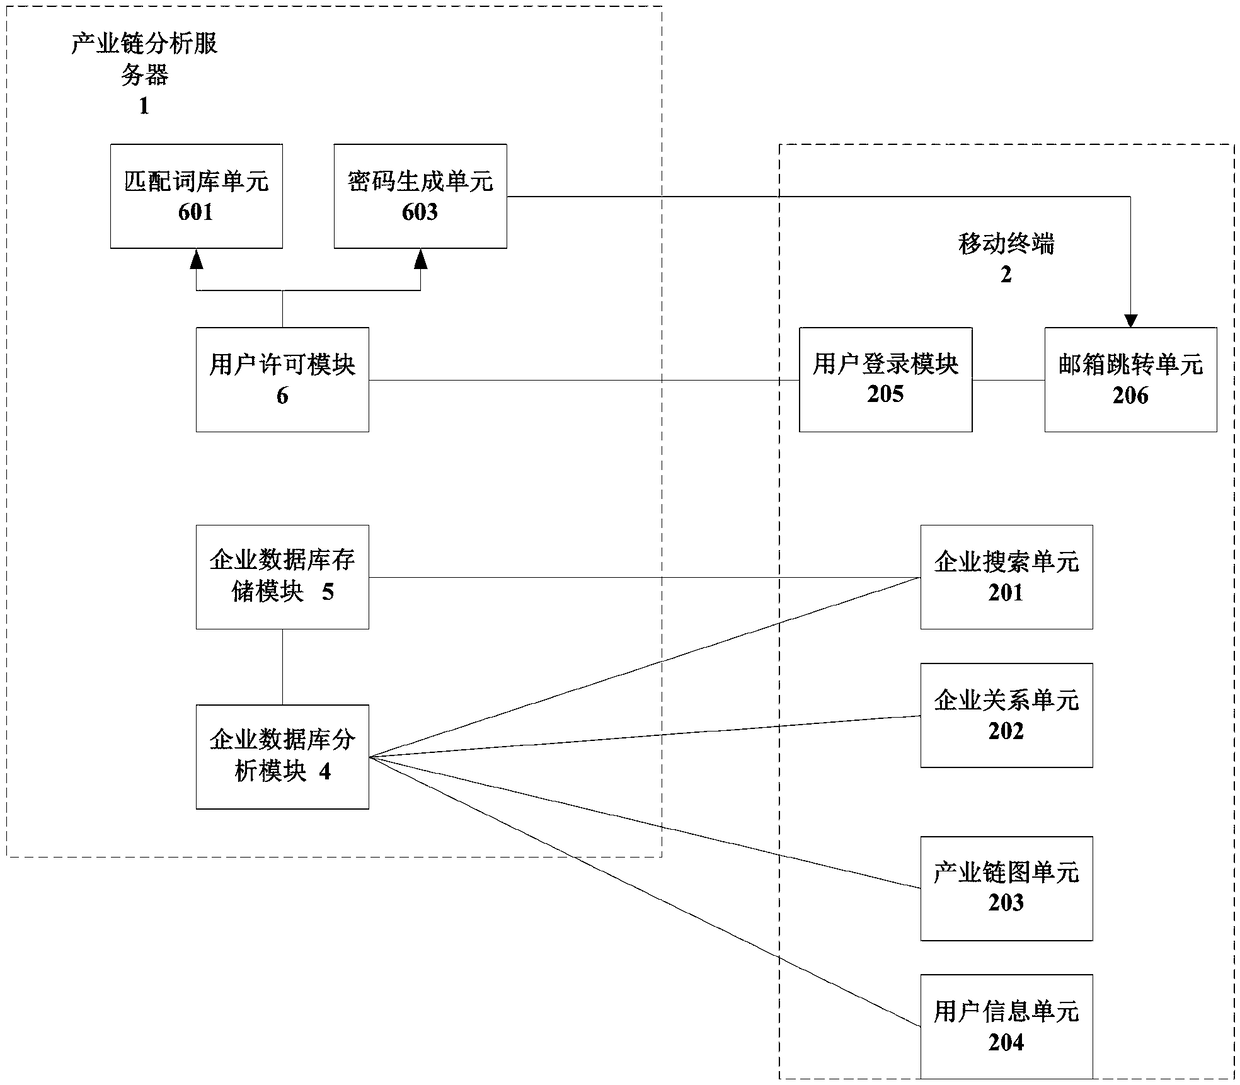 Mobile application platform and method for enterprise industry chain analysis